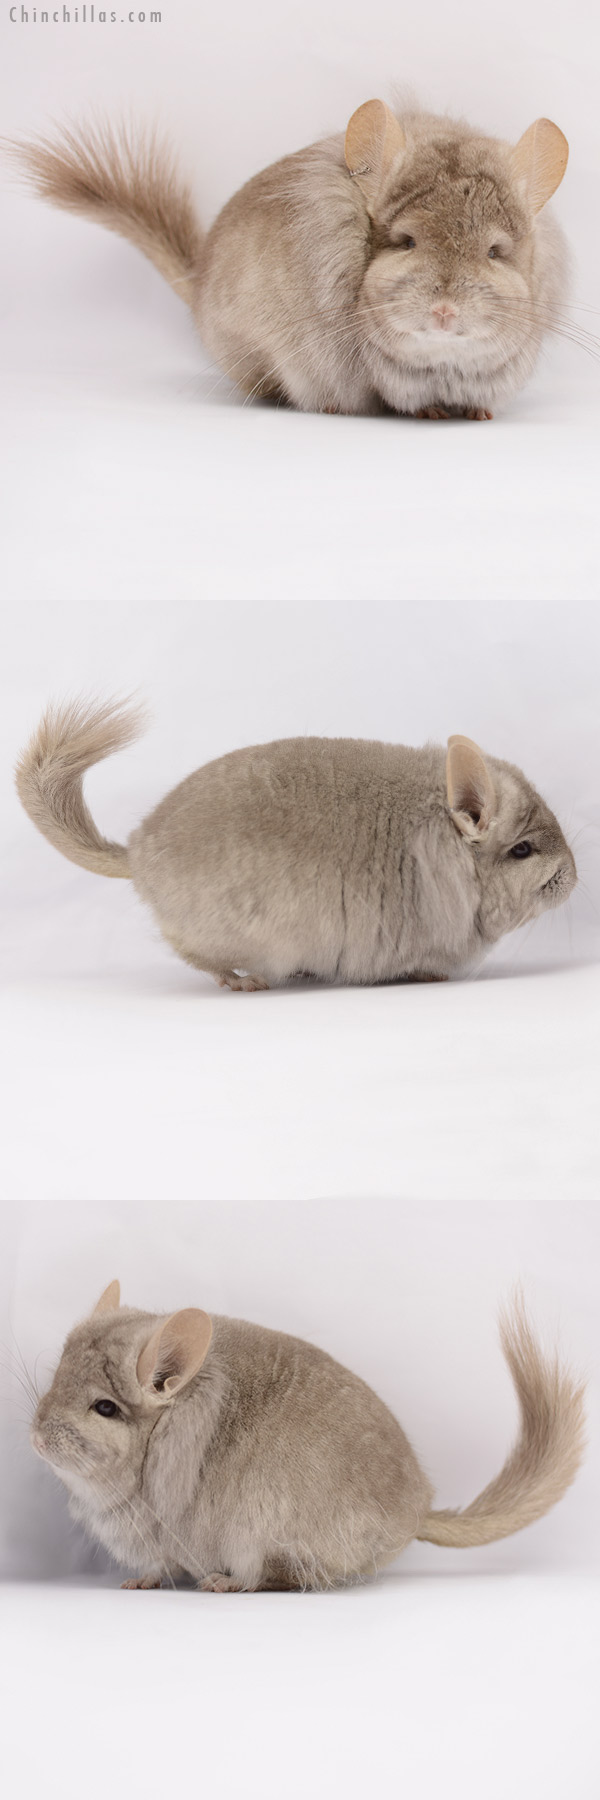 Chinchilla or related item offered for sale or export on Chinchillas.com - 20171 Exceptional Beige  Royal Persian Angora Female Chinchilla with Lion Mane